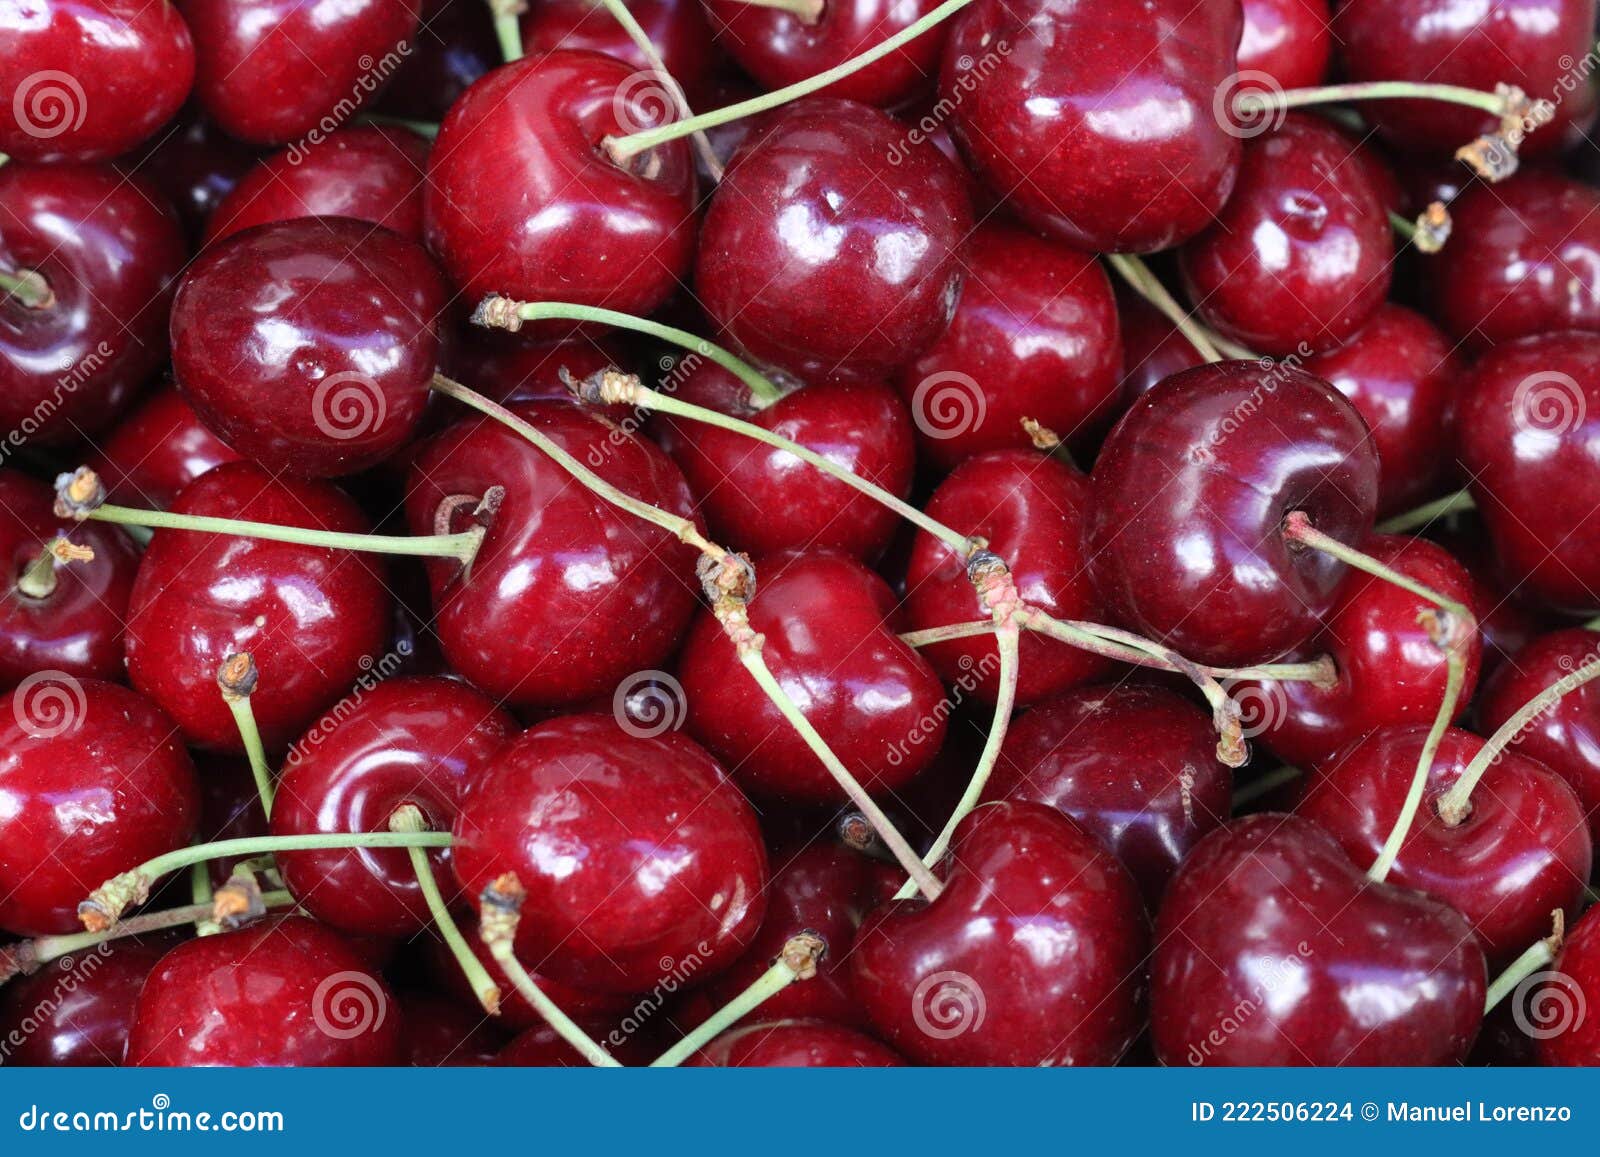 delicious red cherries fruit beautiful tasty nutritious natural food